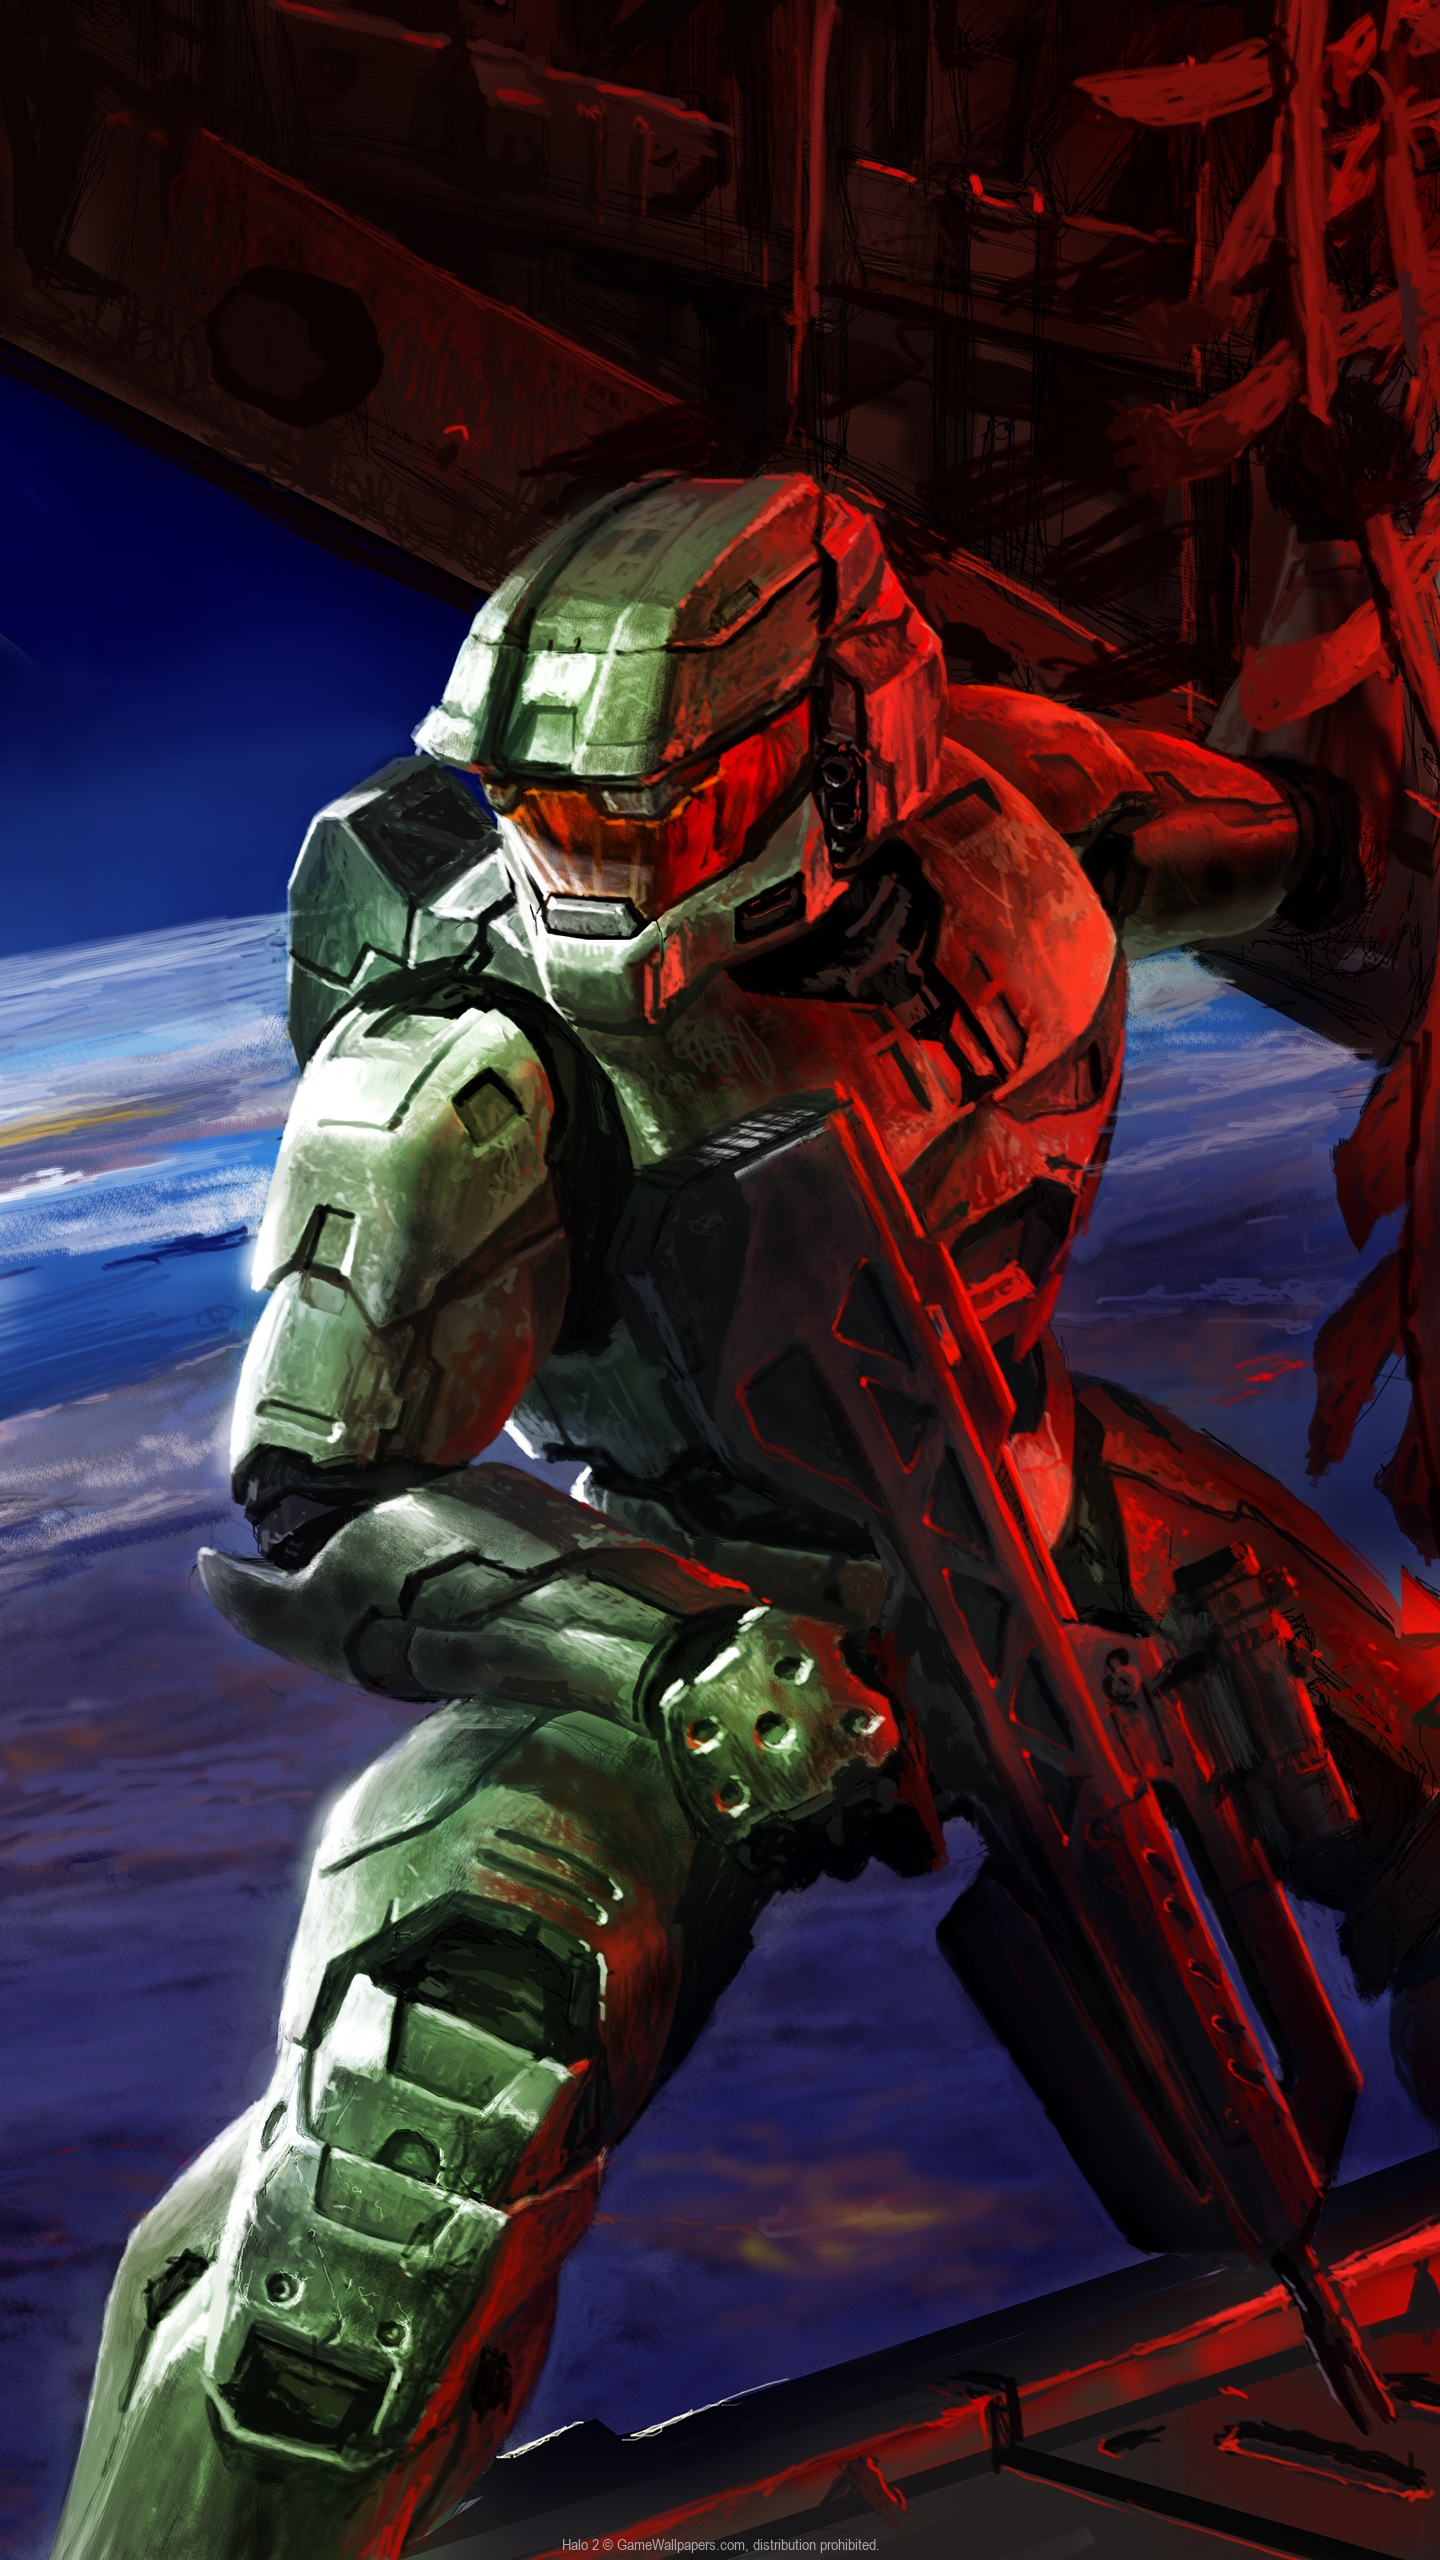 Halo 2 1440p Vertical Mobile wallpaper or background 18